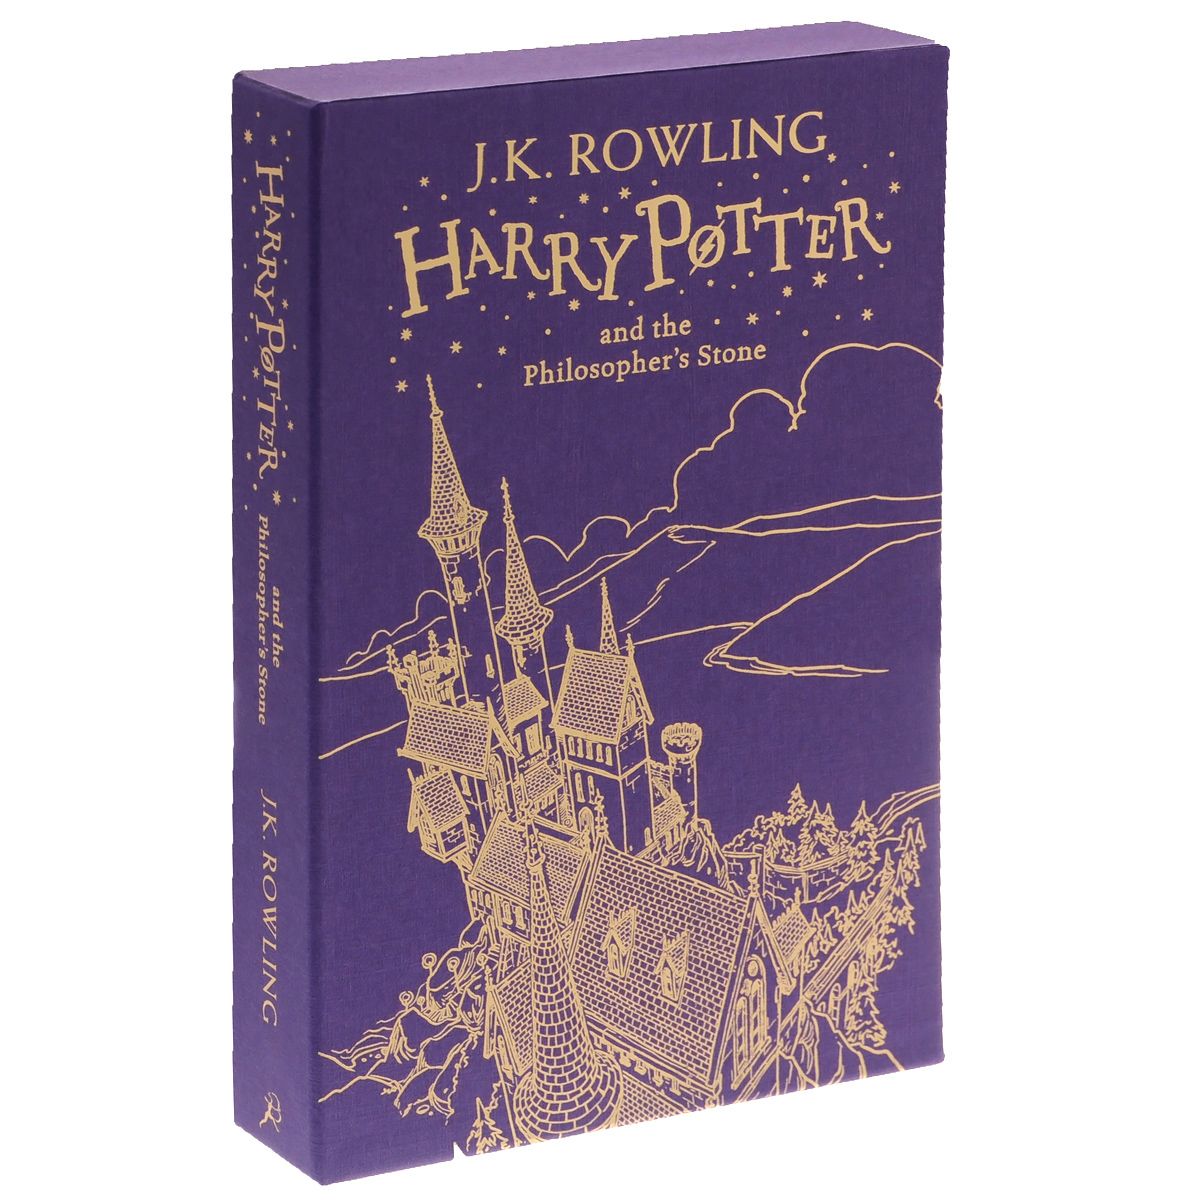 Harry Potter and the Philosophers Stone (Gift Edition)